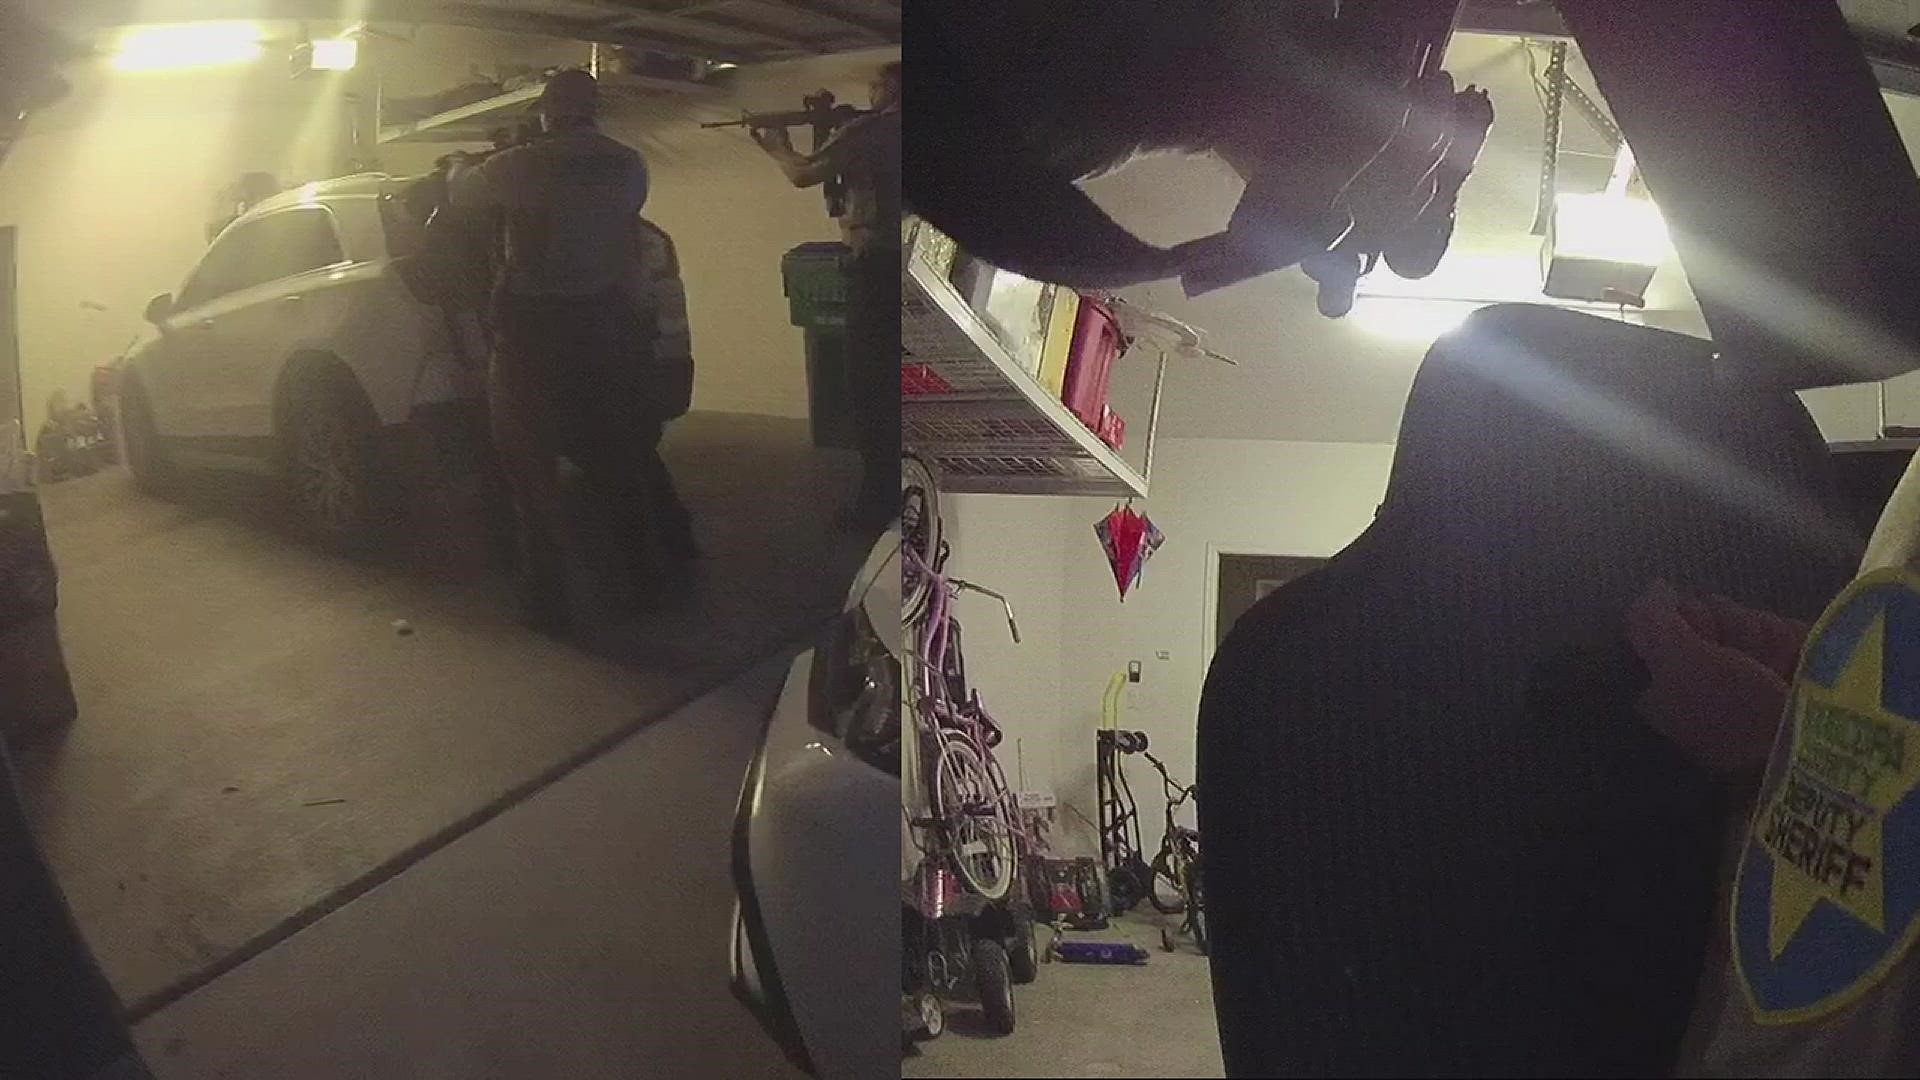 MCSO released bodycam video of a domestic violence situation in Waddell that ended with a suspect getting shot by deputies.